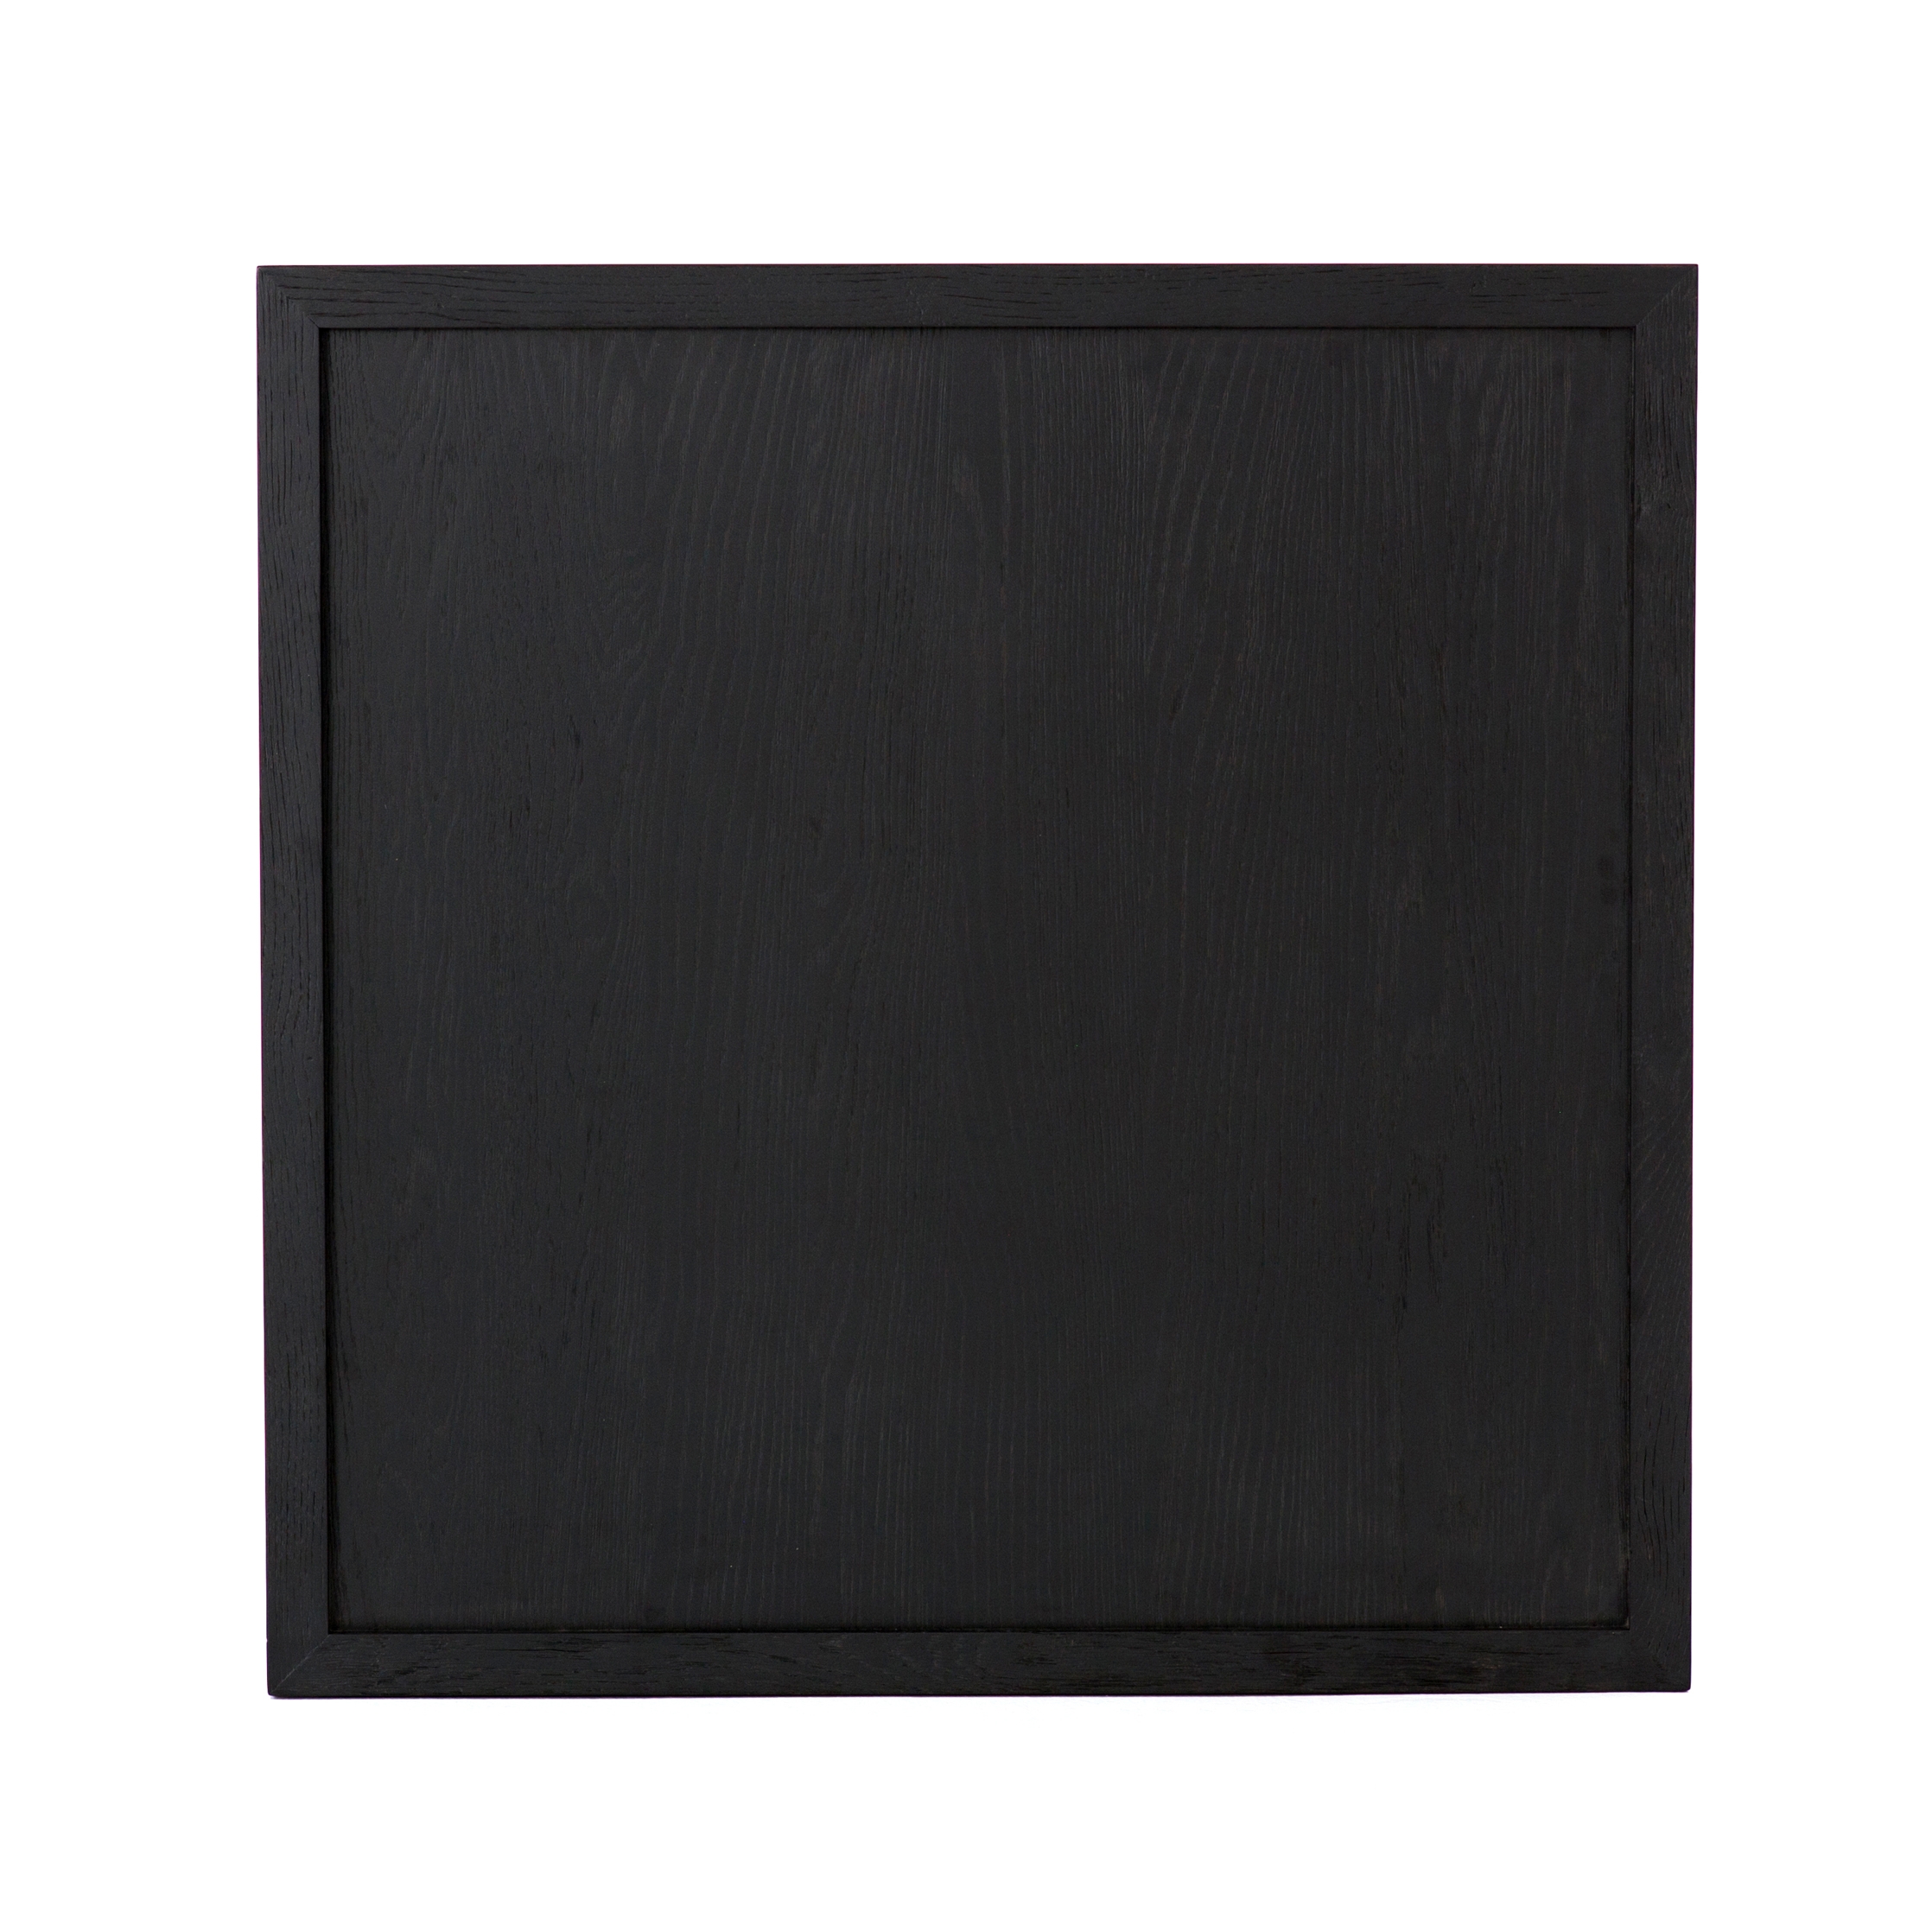 Charley Coffee Table-Drifted Black - Image 7